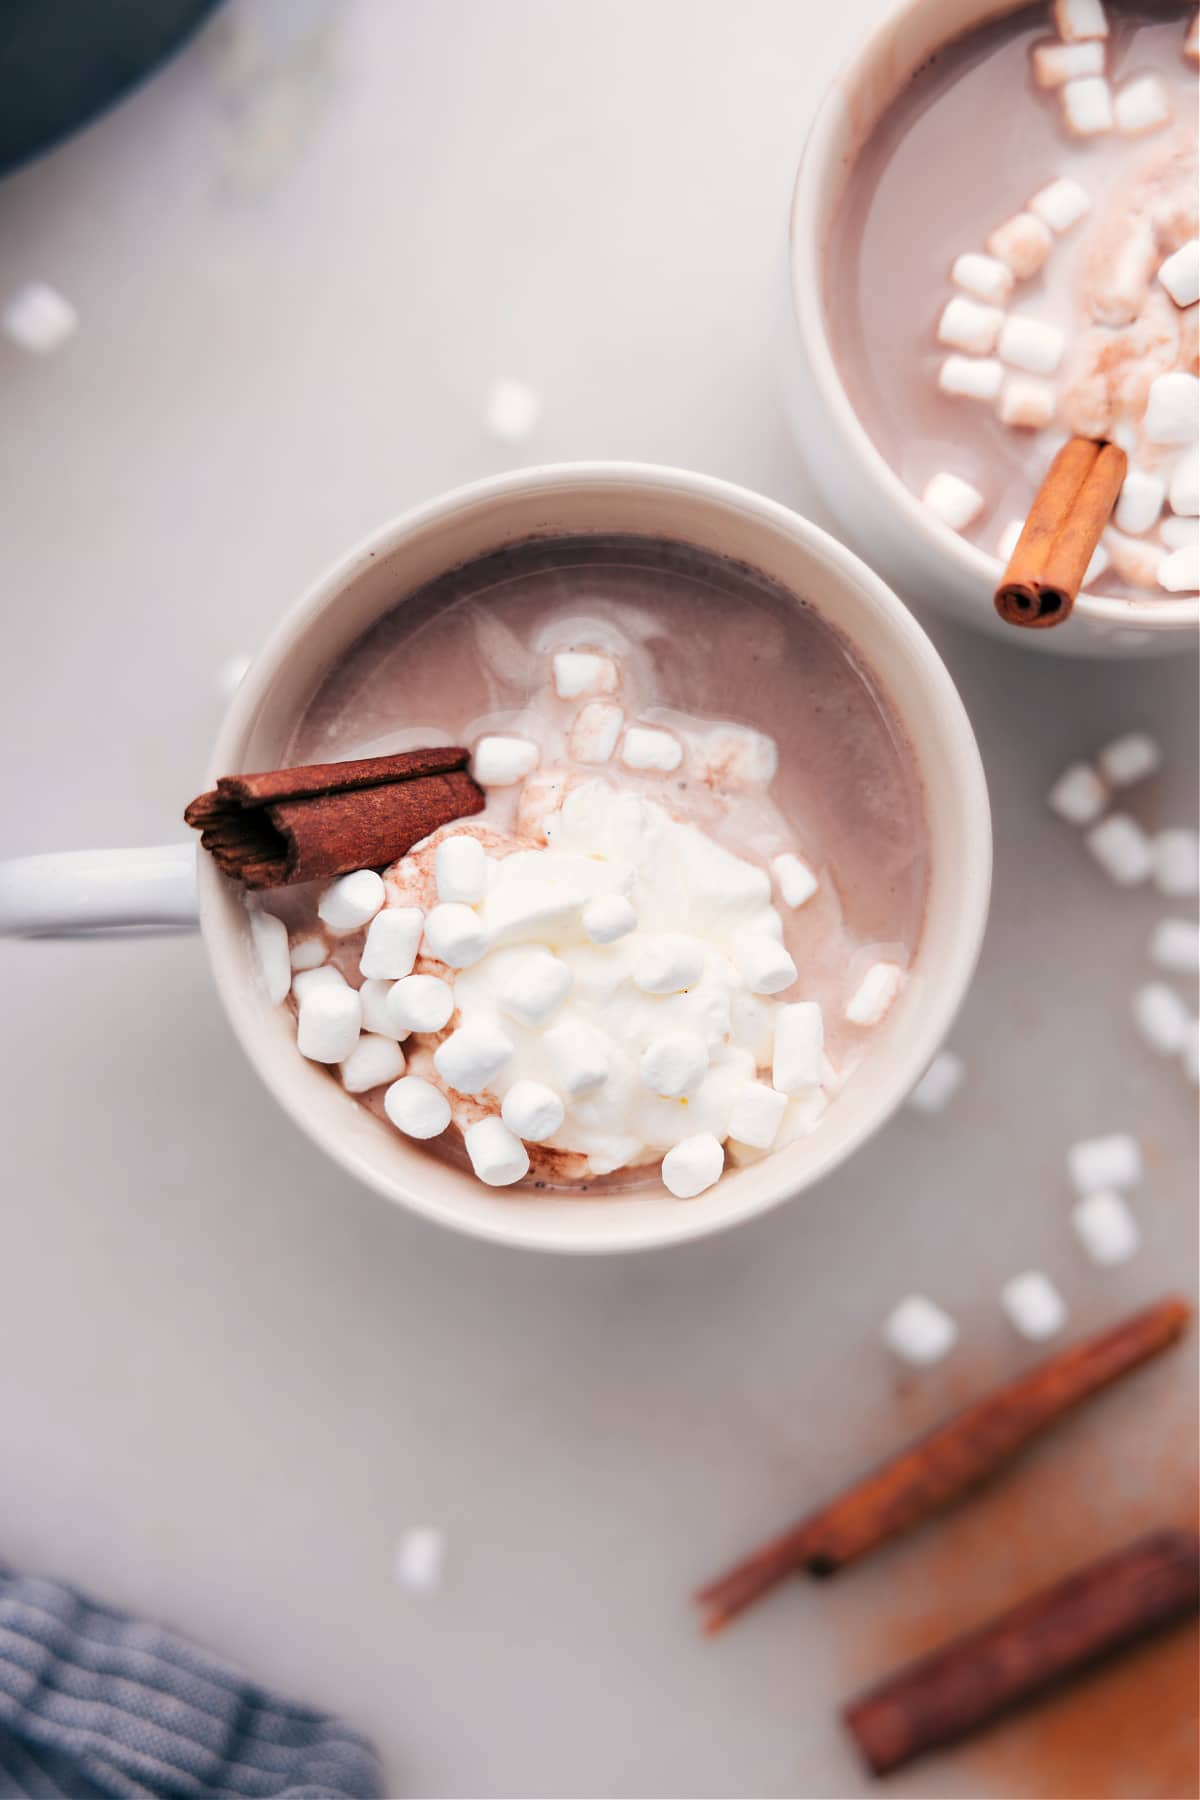 Steaming Mexican hot chocolate crowned with fluffy whipped cream, marshmallows, and a cinnamon stick for the final touch.